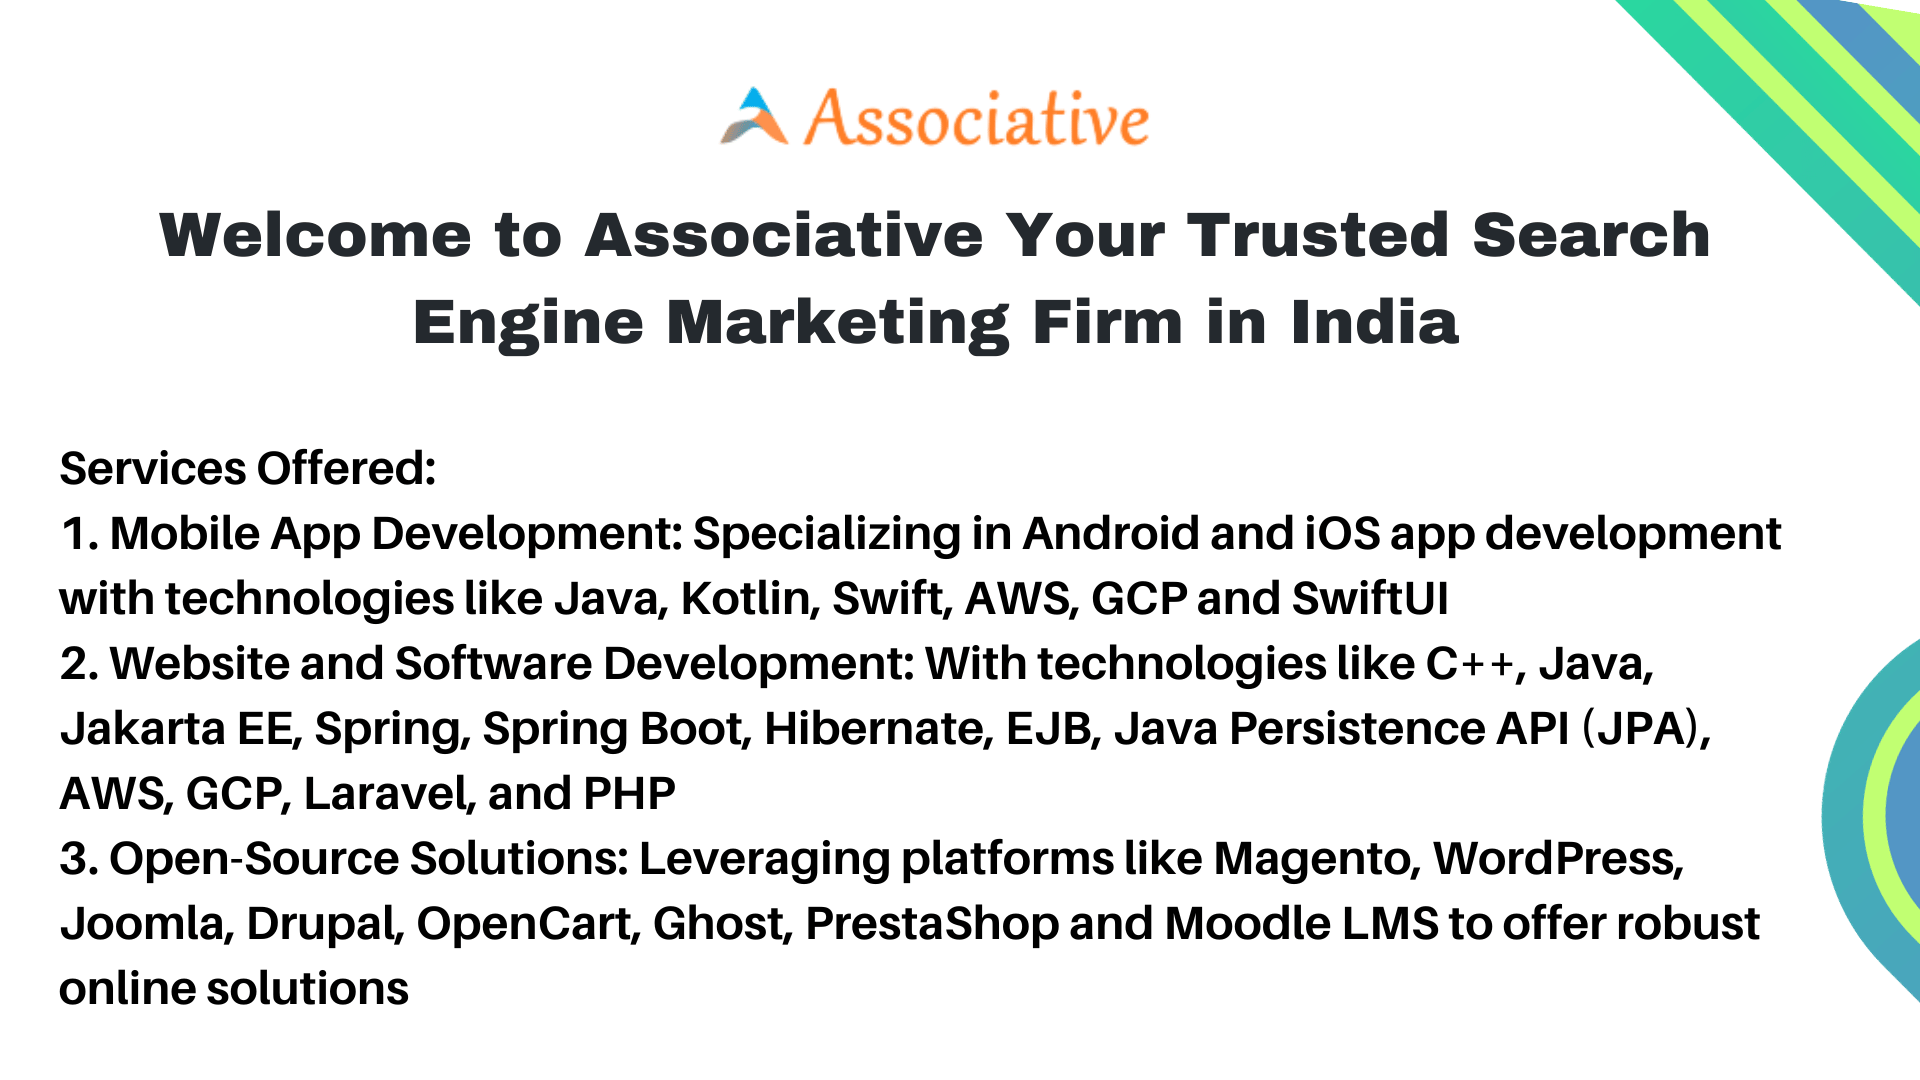 Welcome to Associative Your Trusted Search Engine Marketing Firm in India